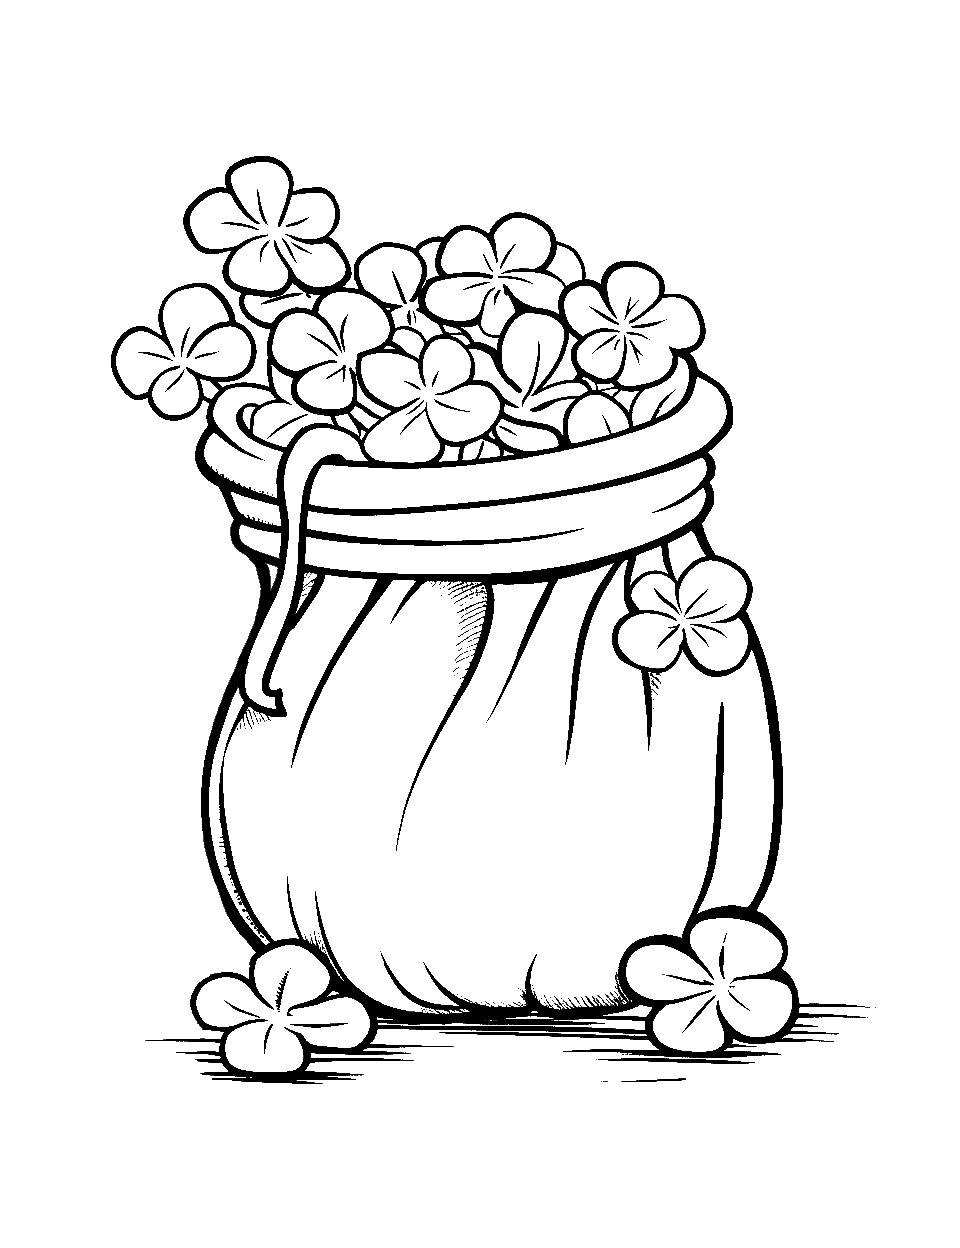 Leprechaun's Sack of Shamrock Coloring Page - A hefty sack filled with shamrocks flowing out.